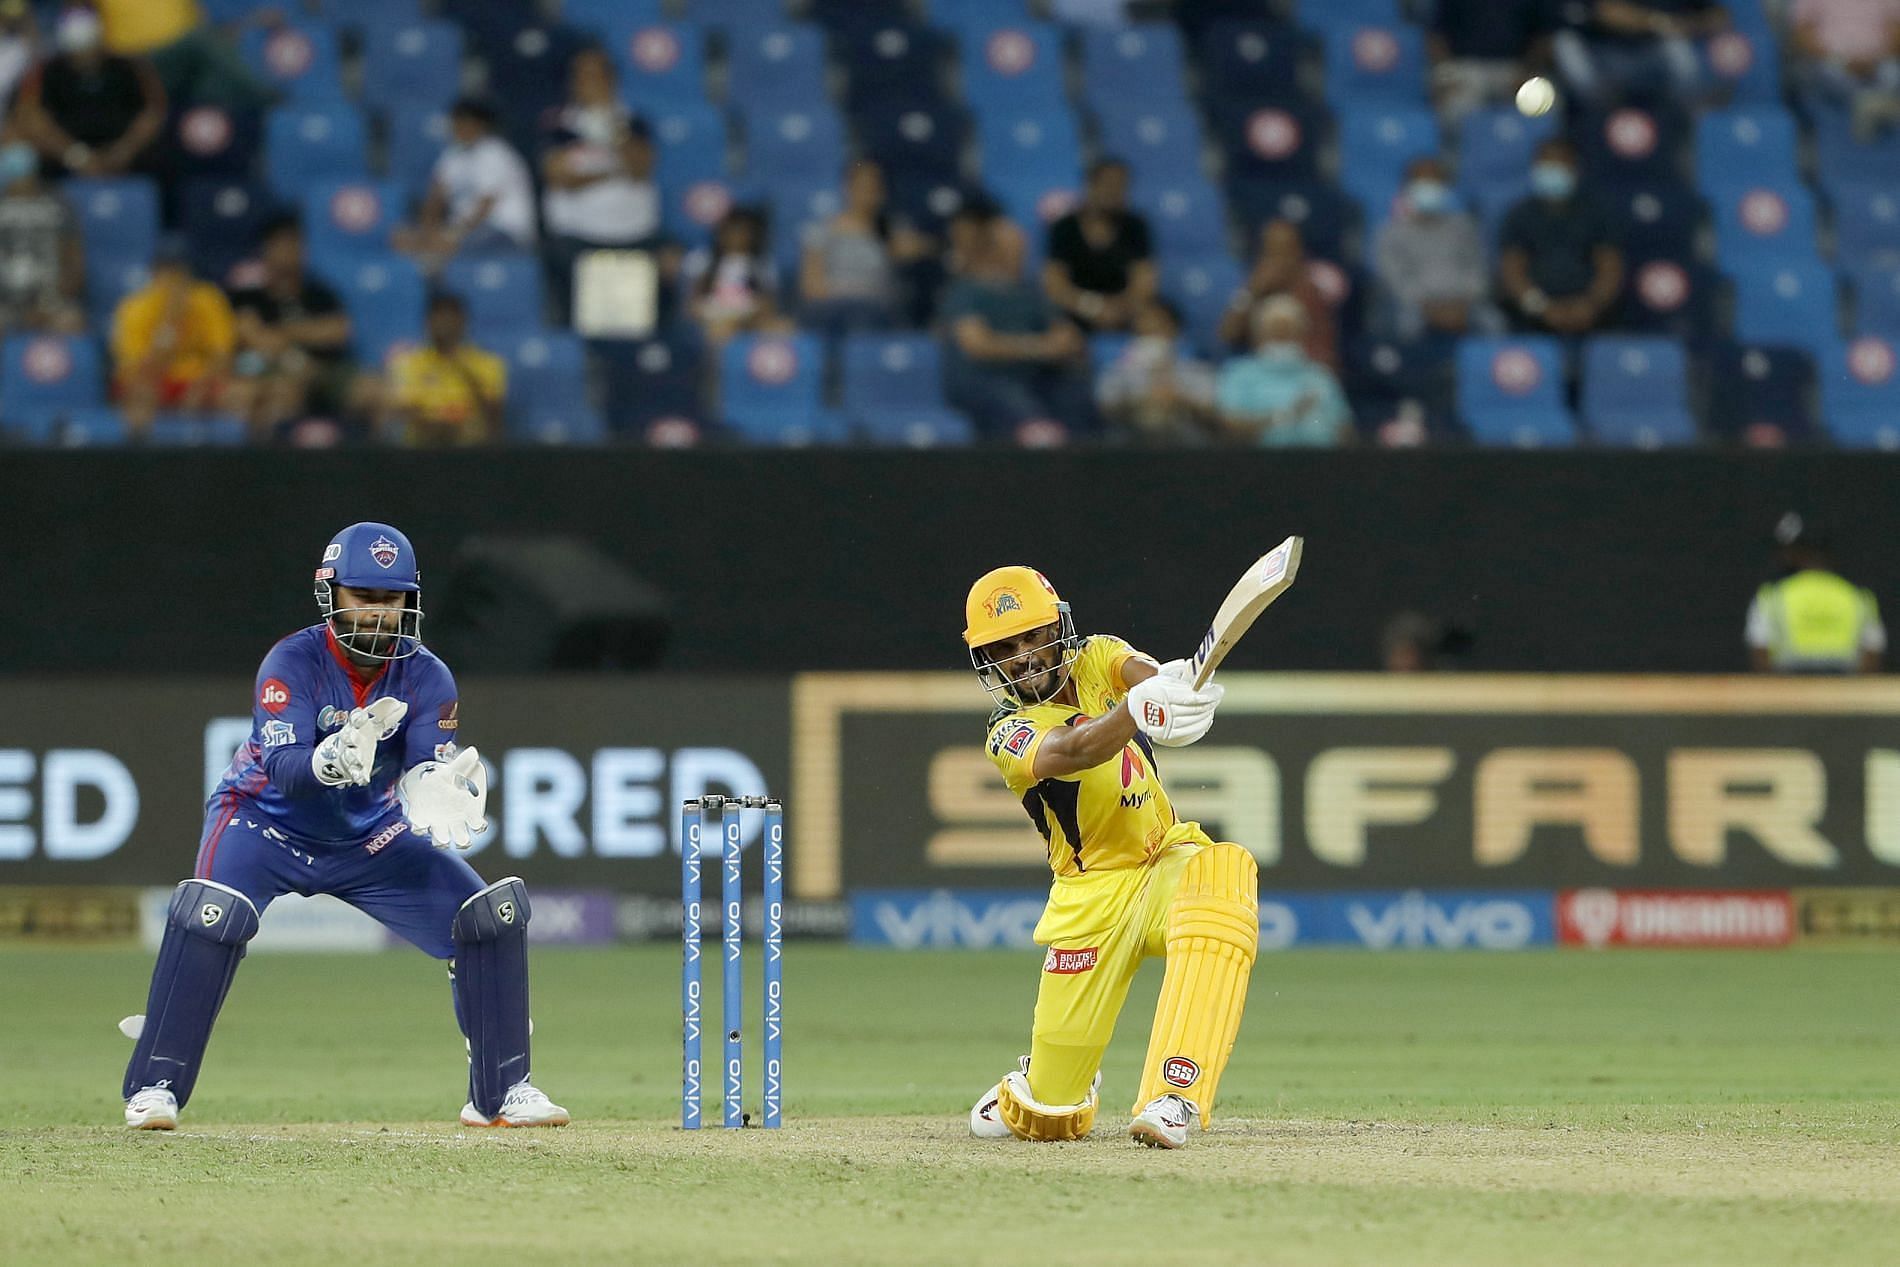 The CSK opener&rsquo;s hundred against RR came in a losing cause. (Pic: BCCI)